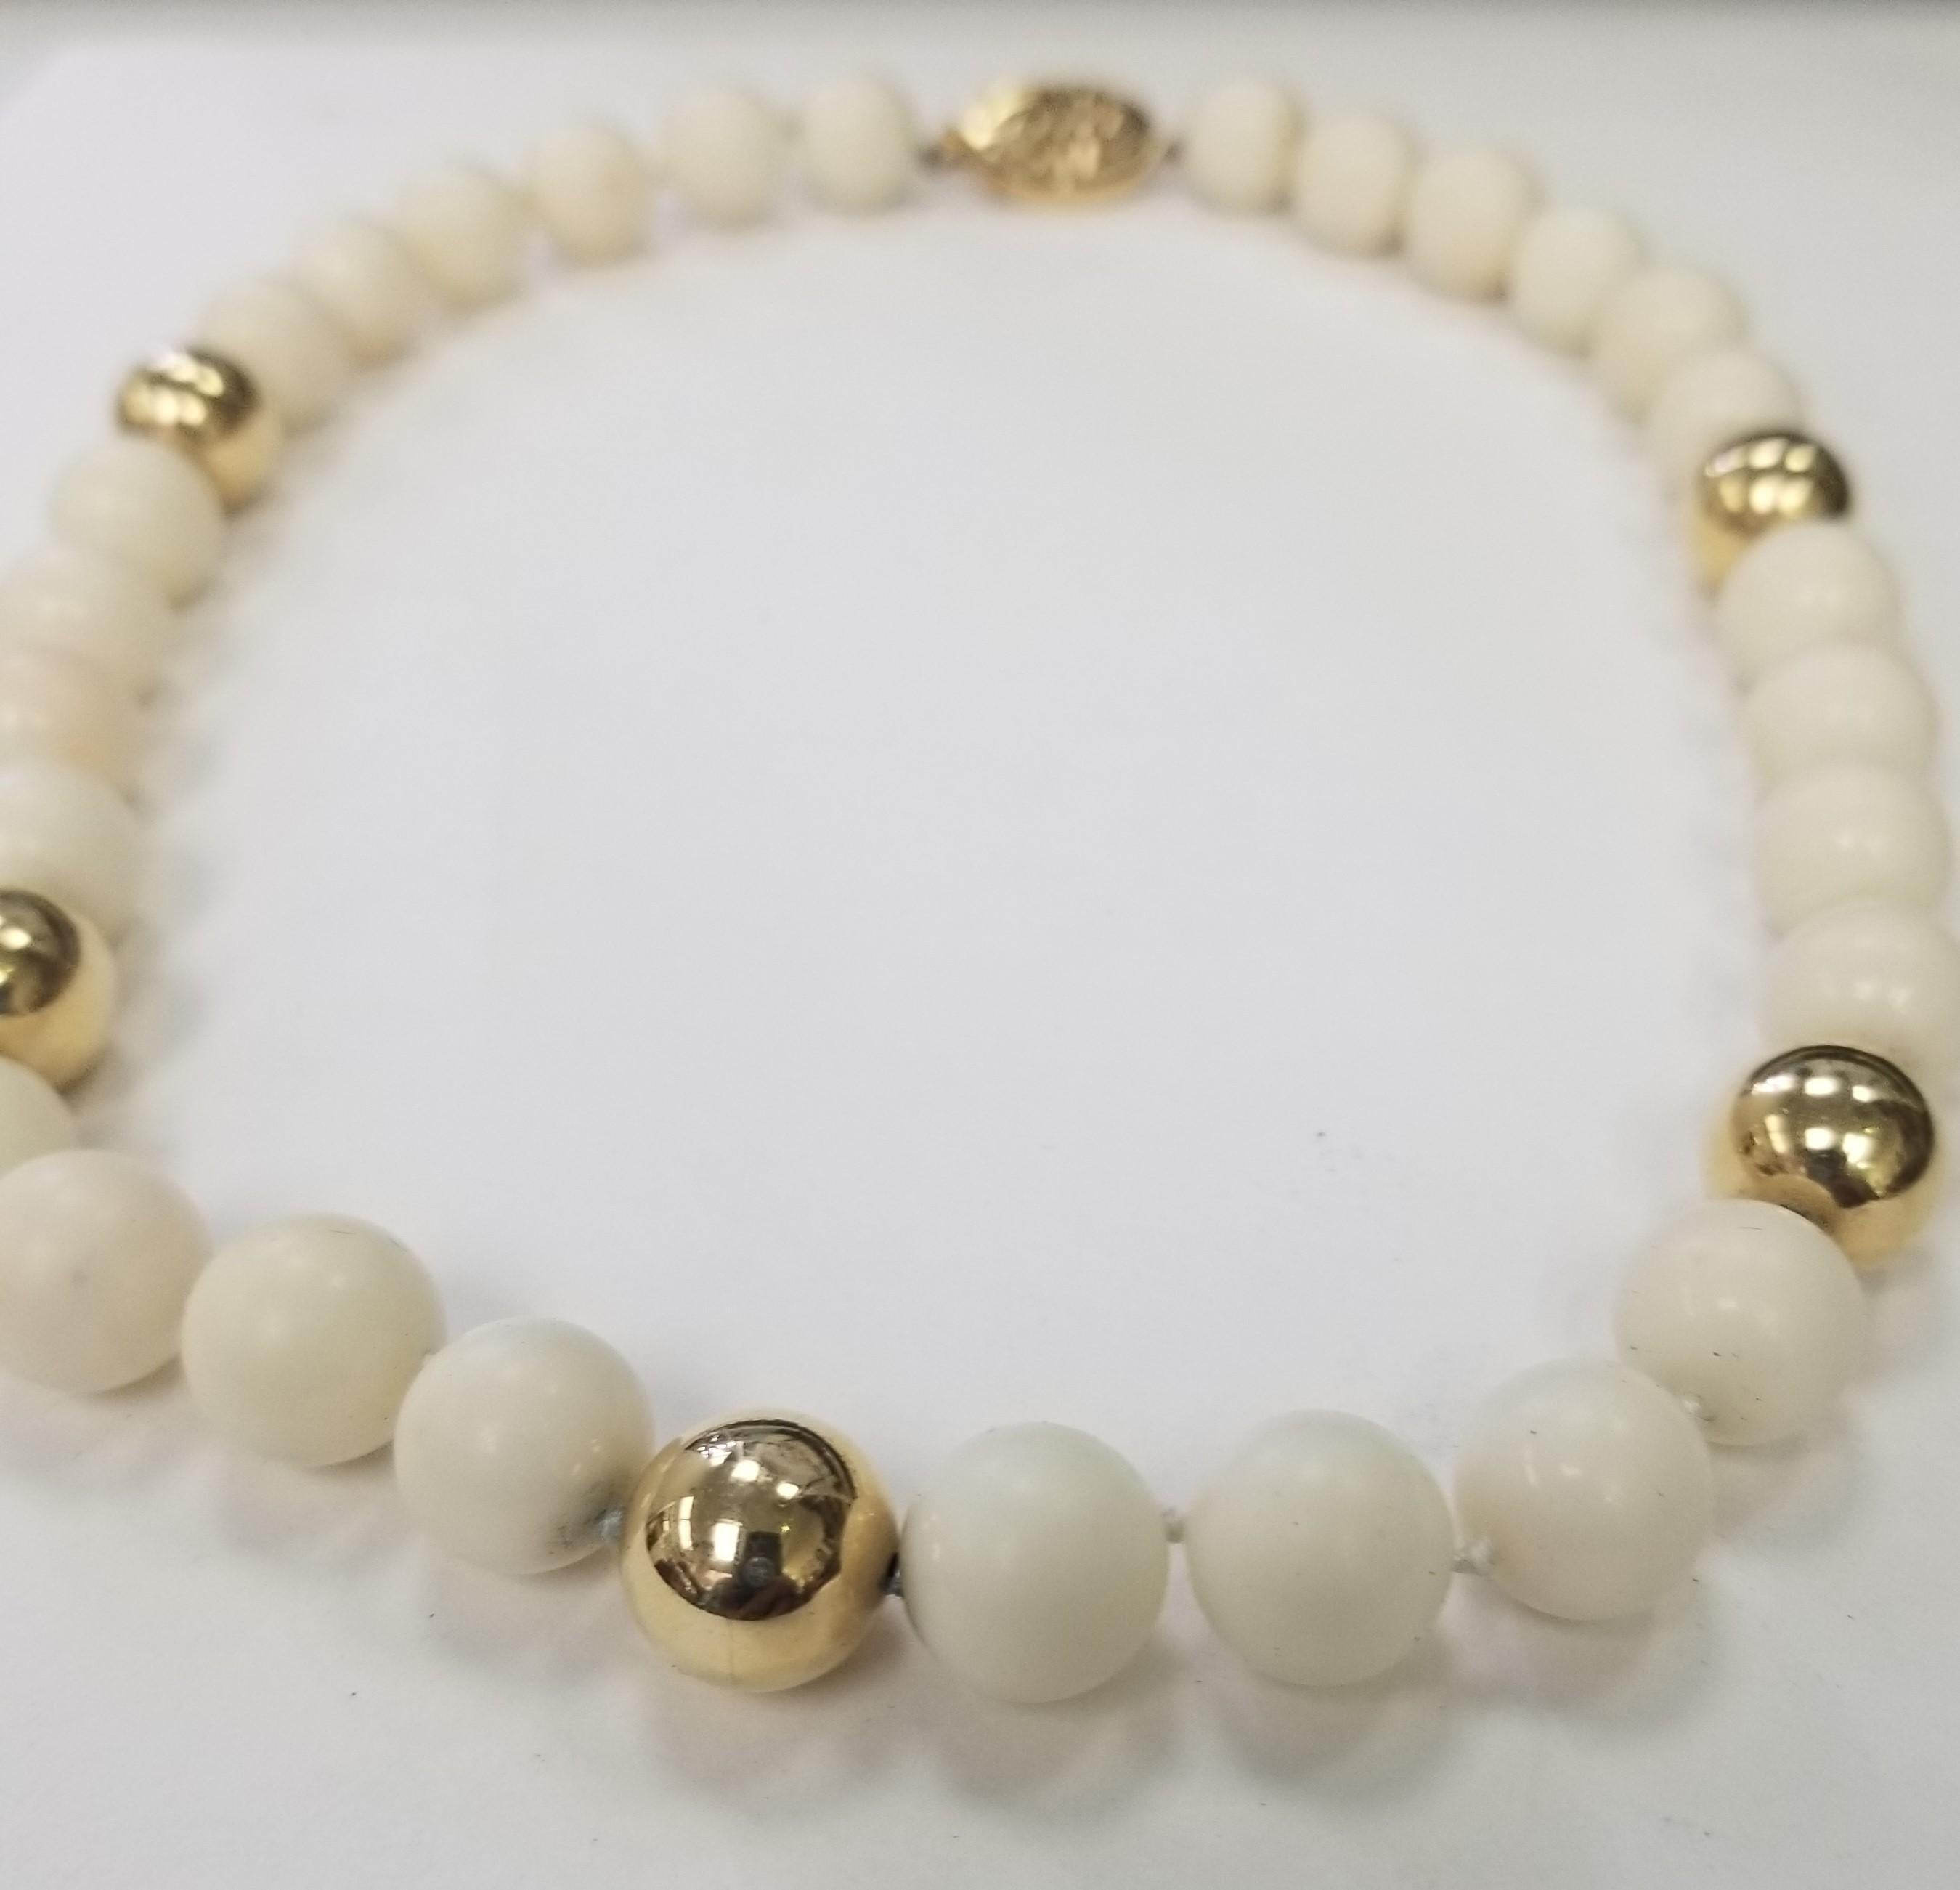  Elegant and finely detailed 12mm Bead Necklace. Hand crafted in 14 Karat Yellow Gold. The Necklace epitomizes vintage charm, taking you from day to evening effortlessly. The Necklace is in excellent condition and was recently professionally cleaned